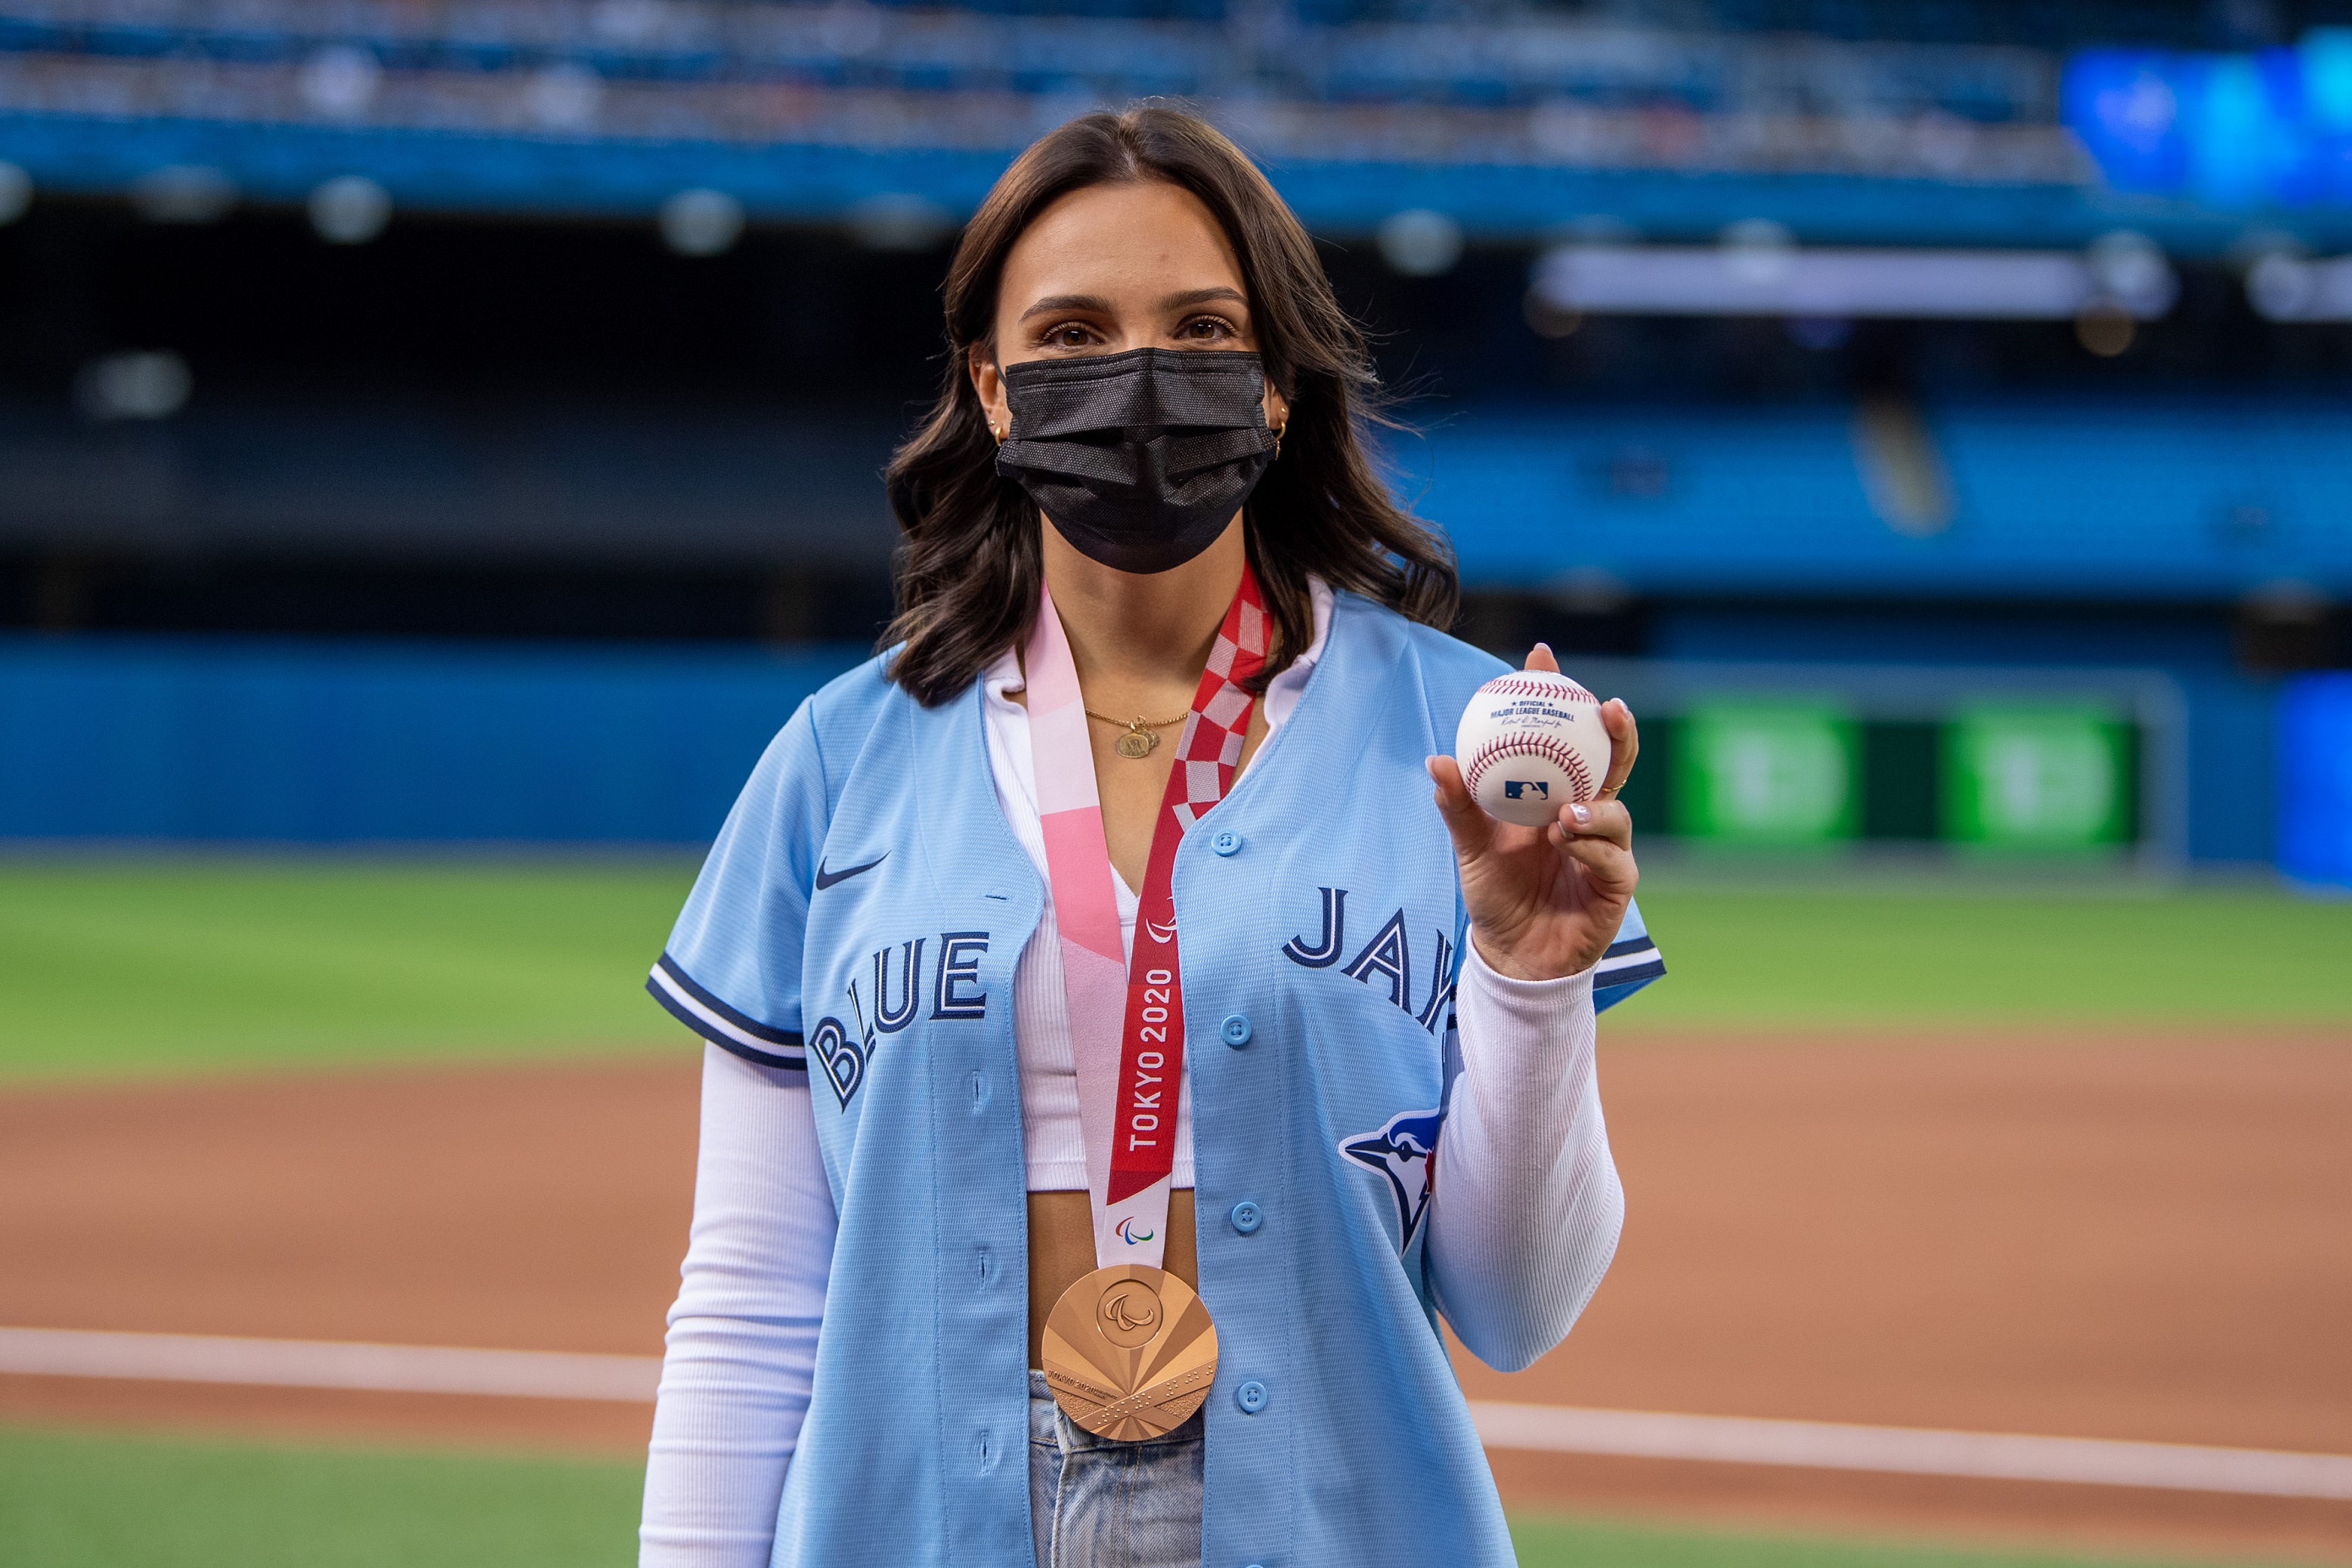 Marissa Papaconstantinou holding a baseball, wearing her bronze medal and a Blue Jays jersey before throwing out the first pitch at the Blue Jays game